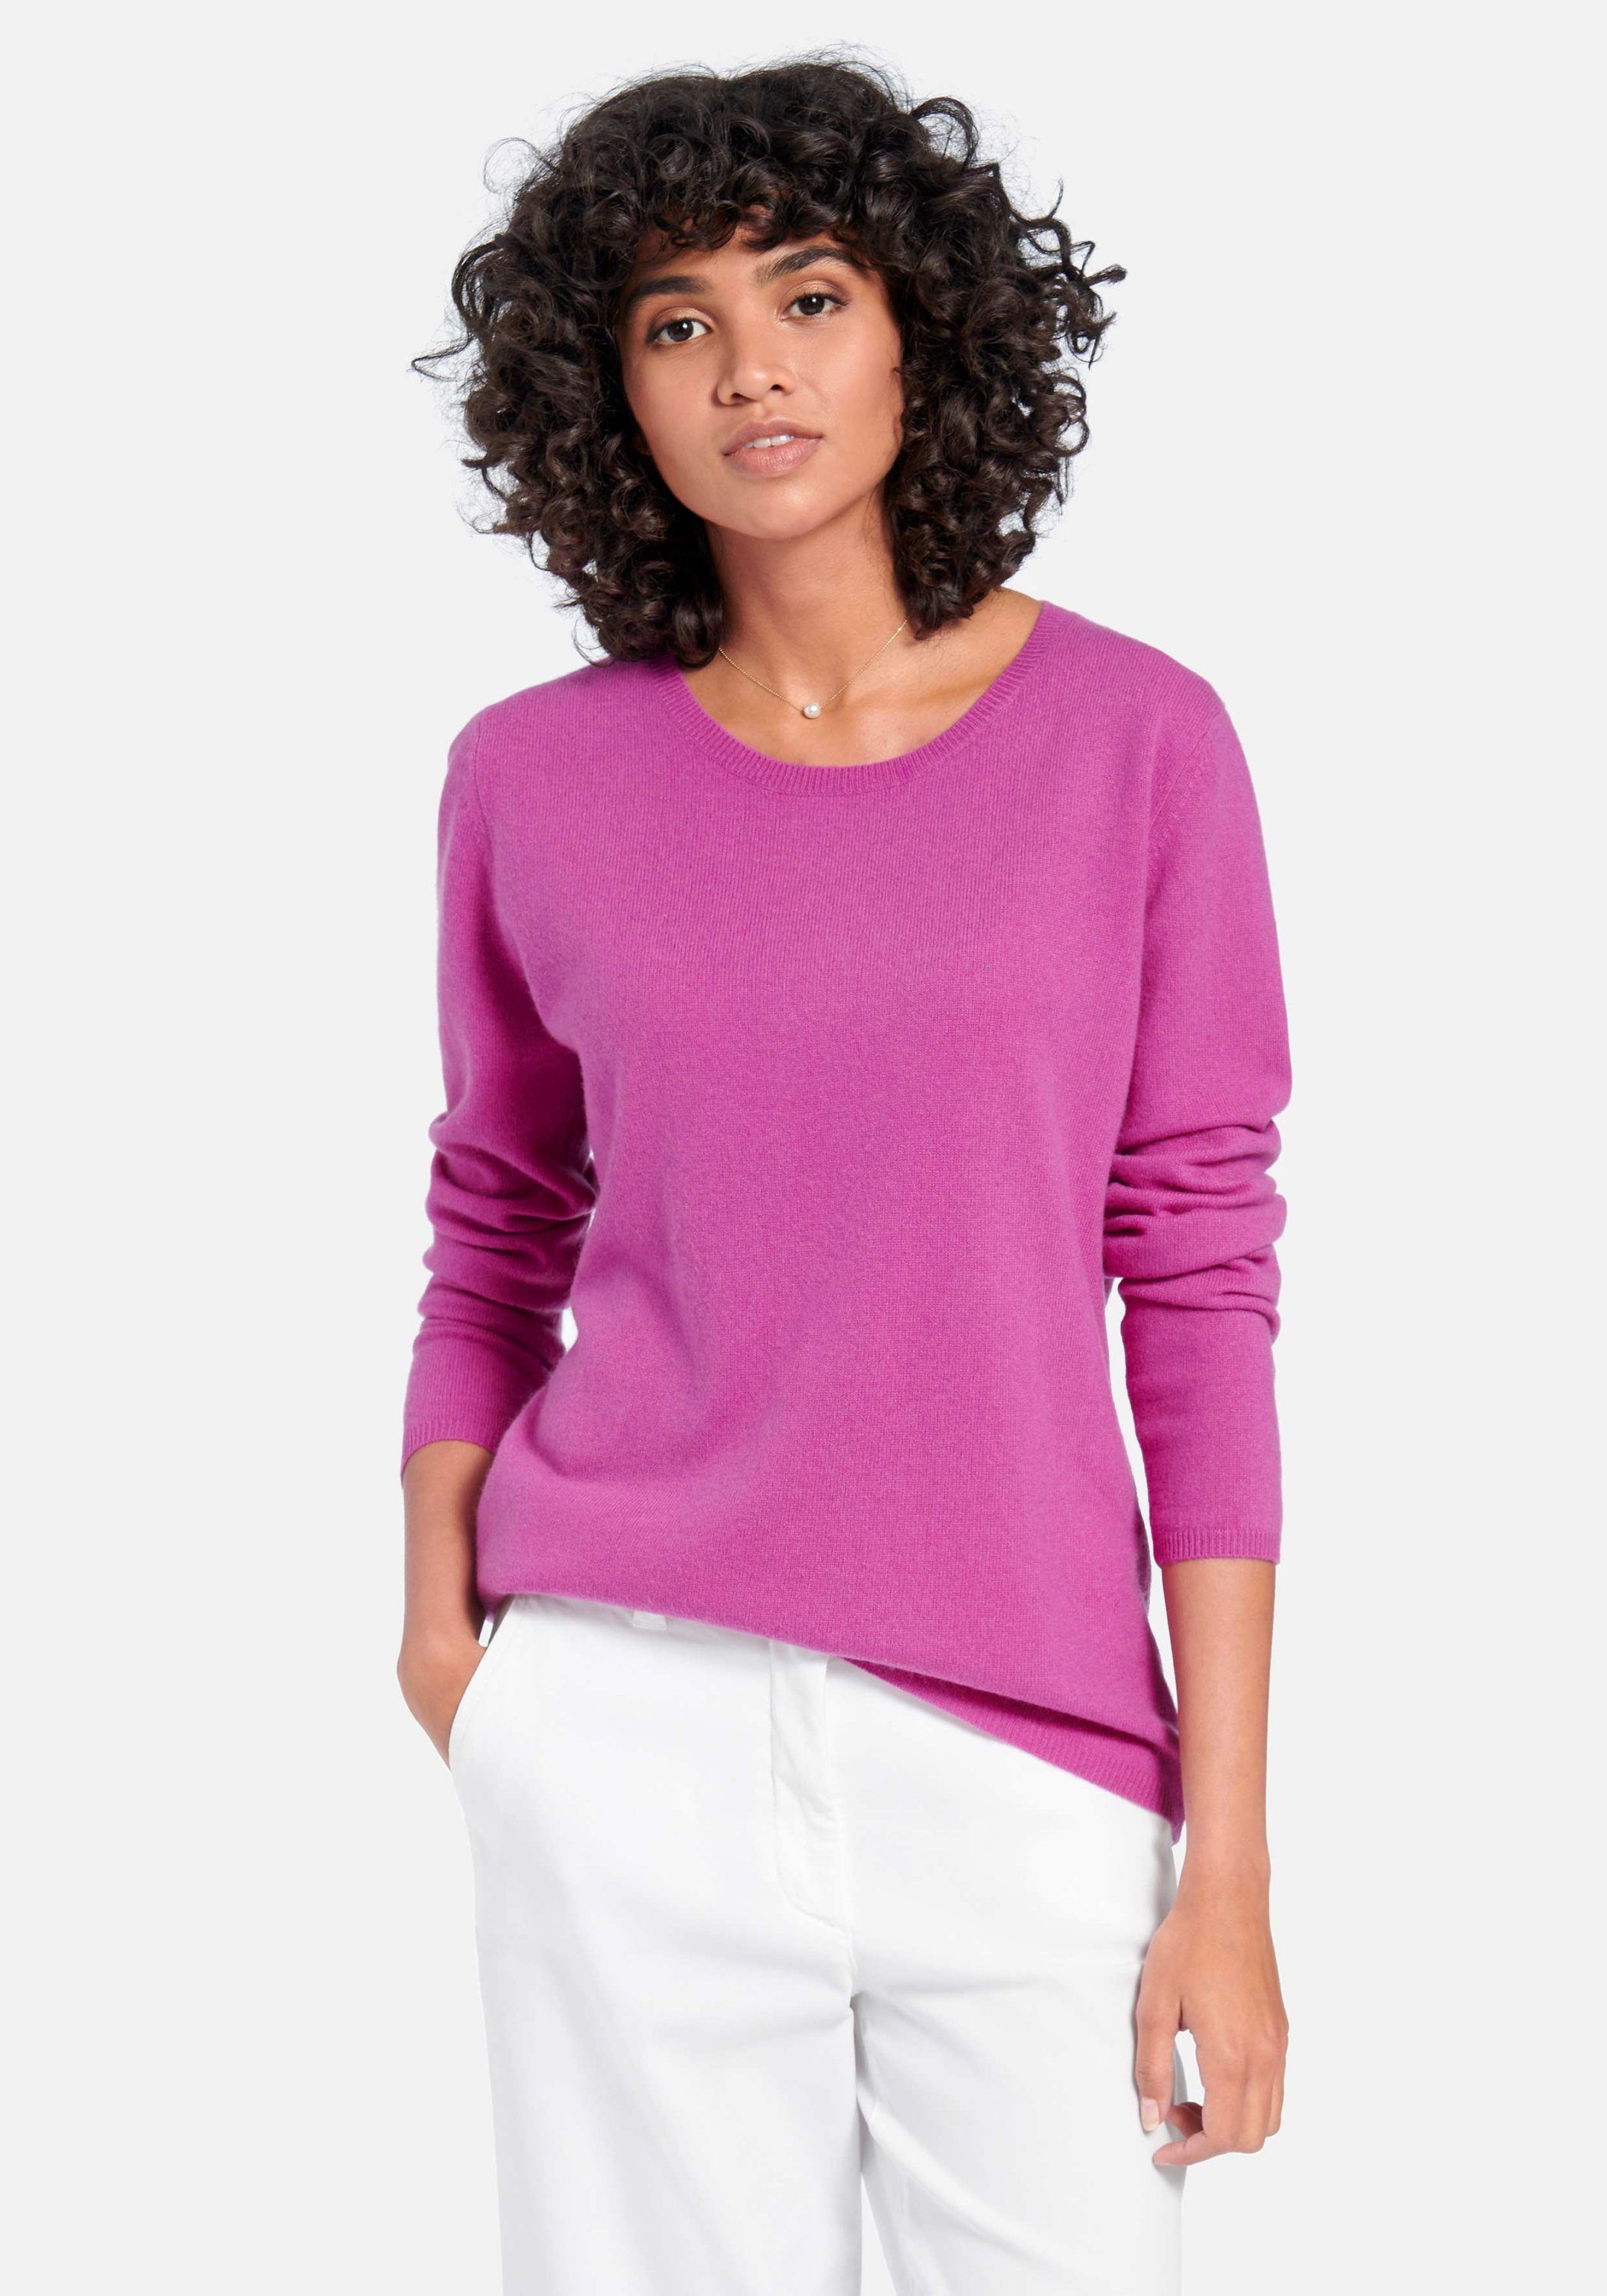 new wool include Strickpullover MAGENTA